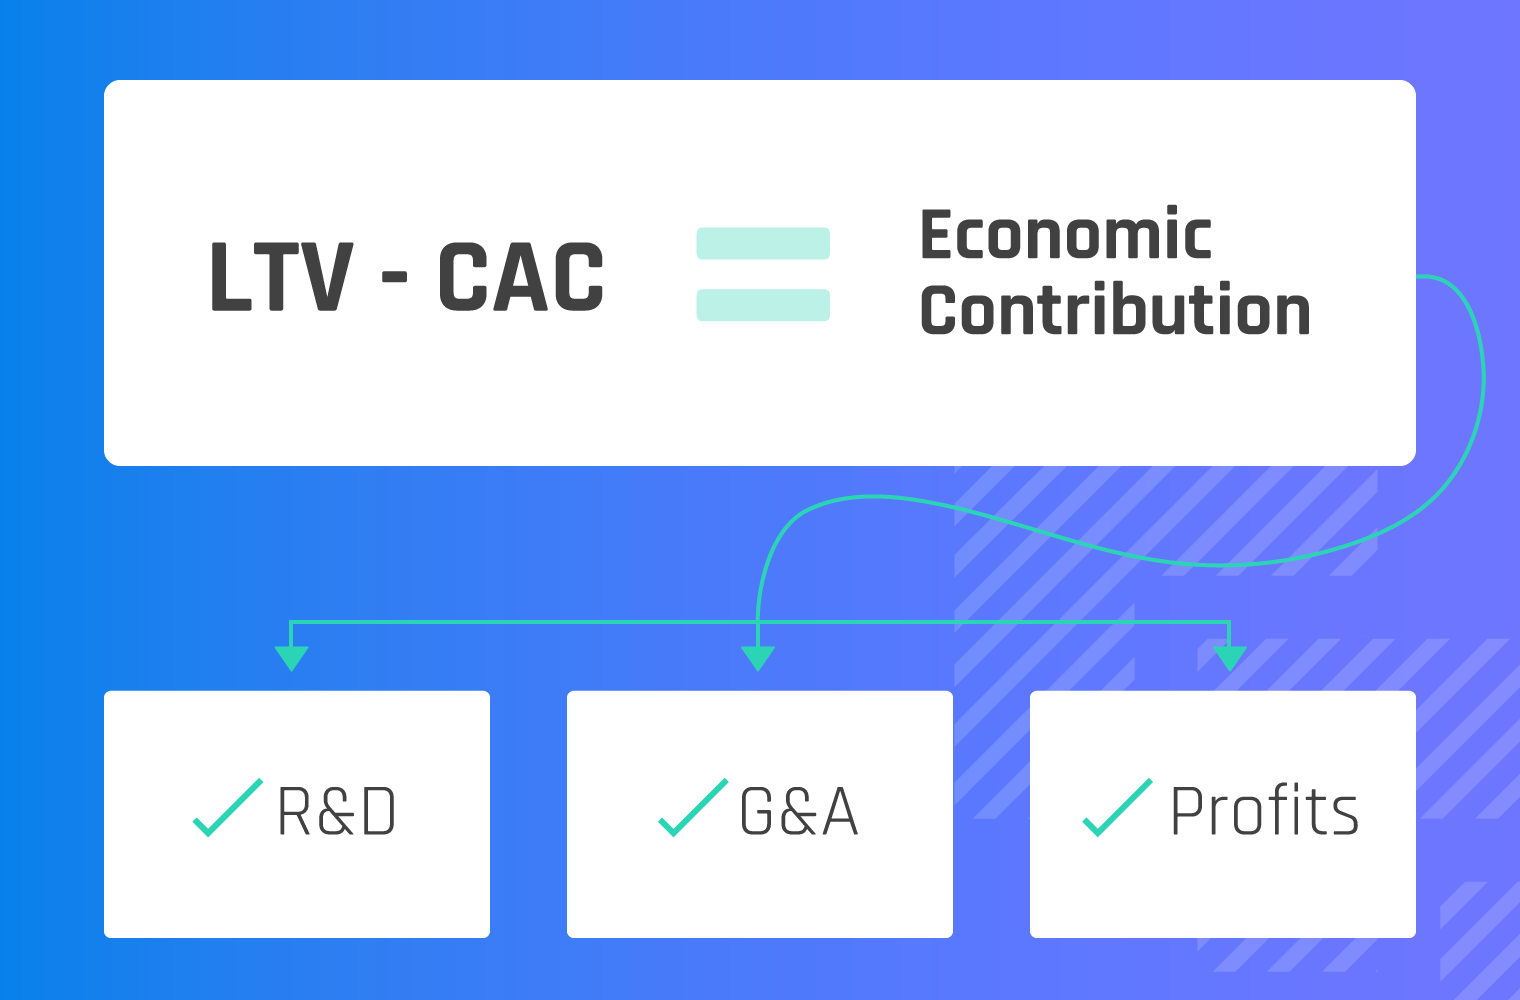 LTV - CAC = Economic Contribution that funds R&D G&A and Profits